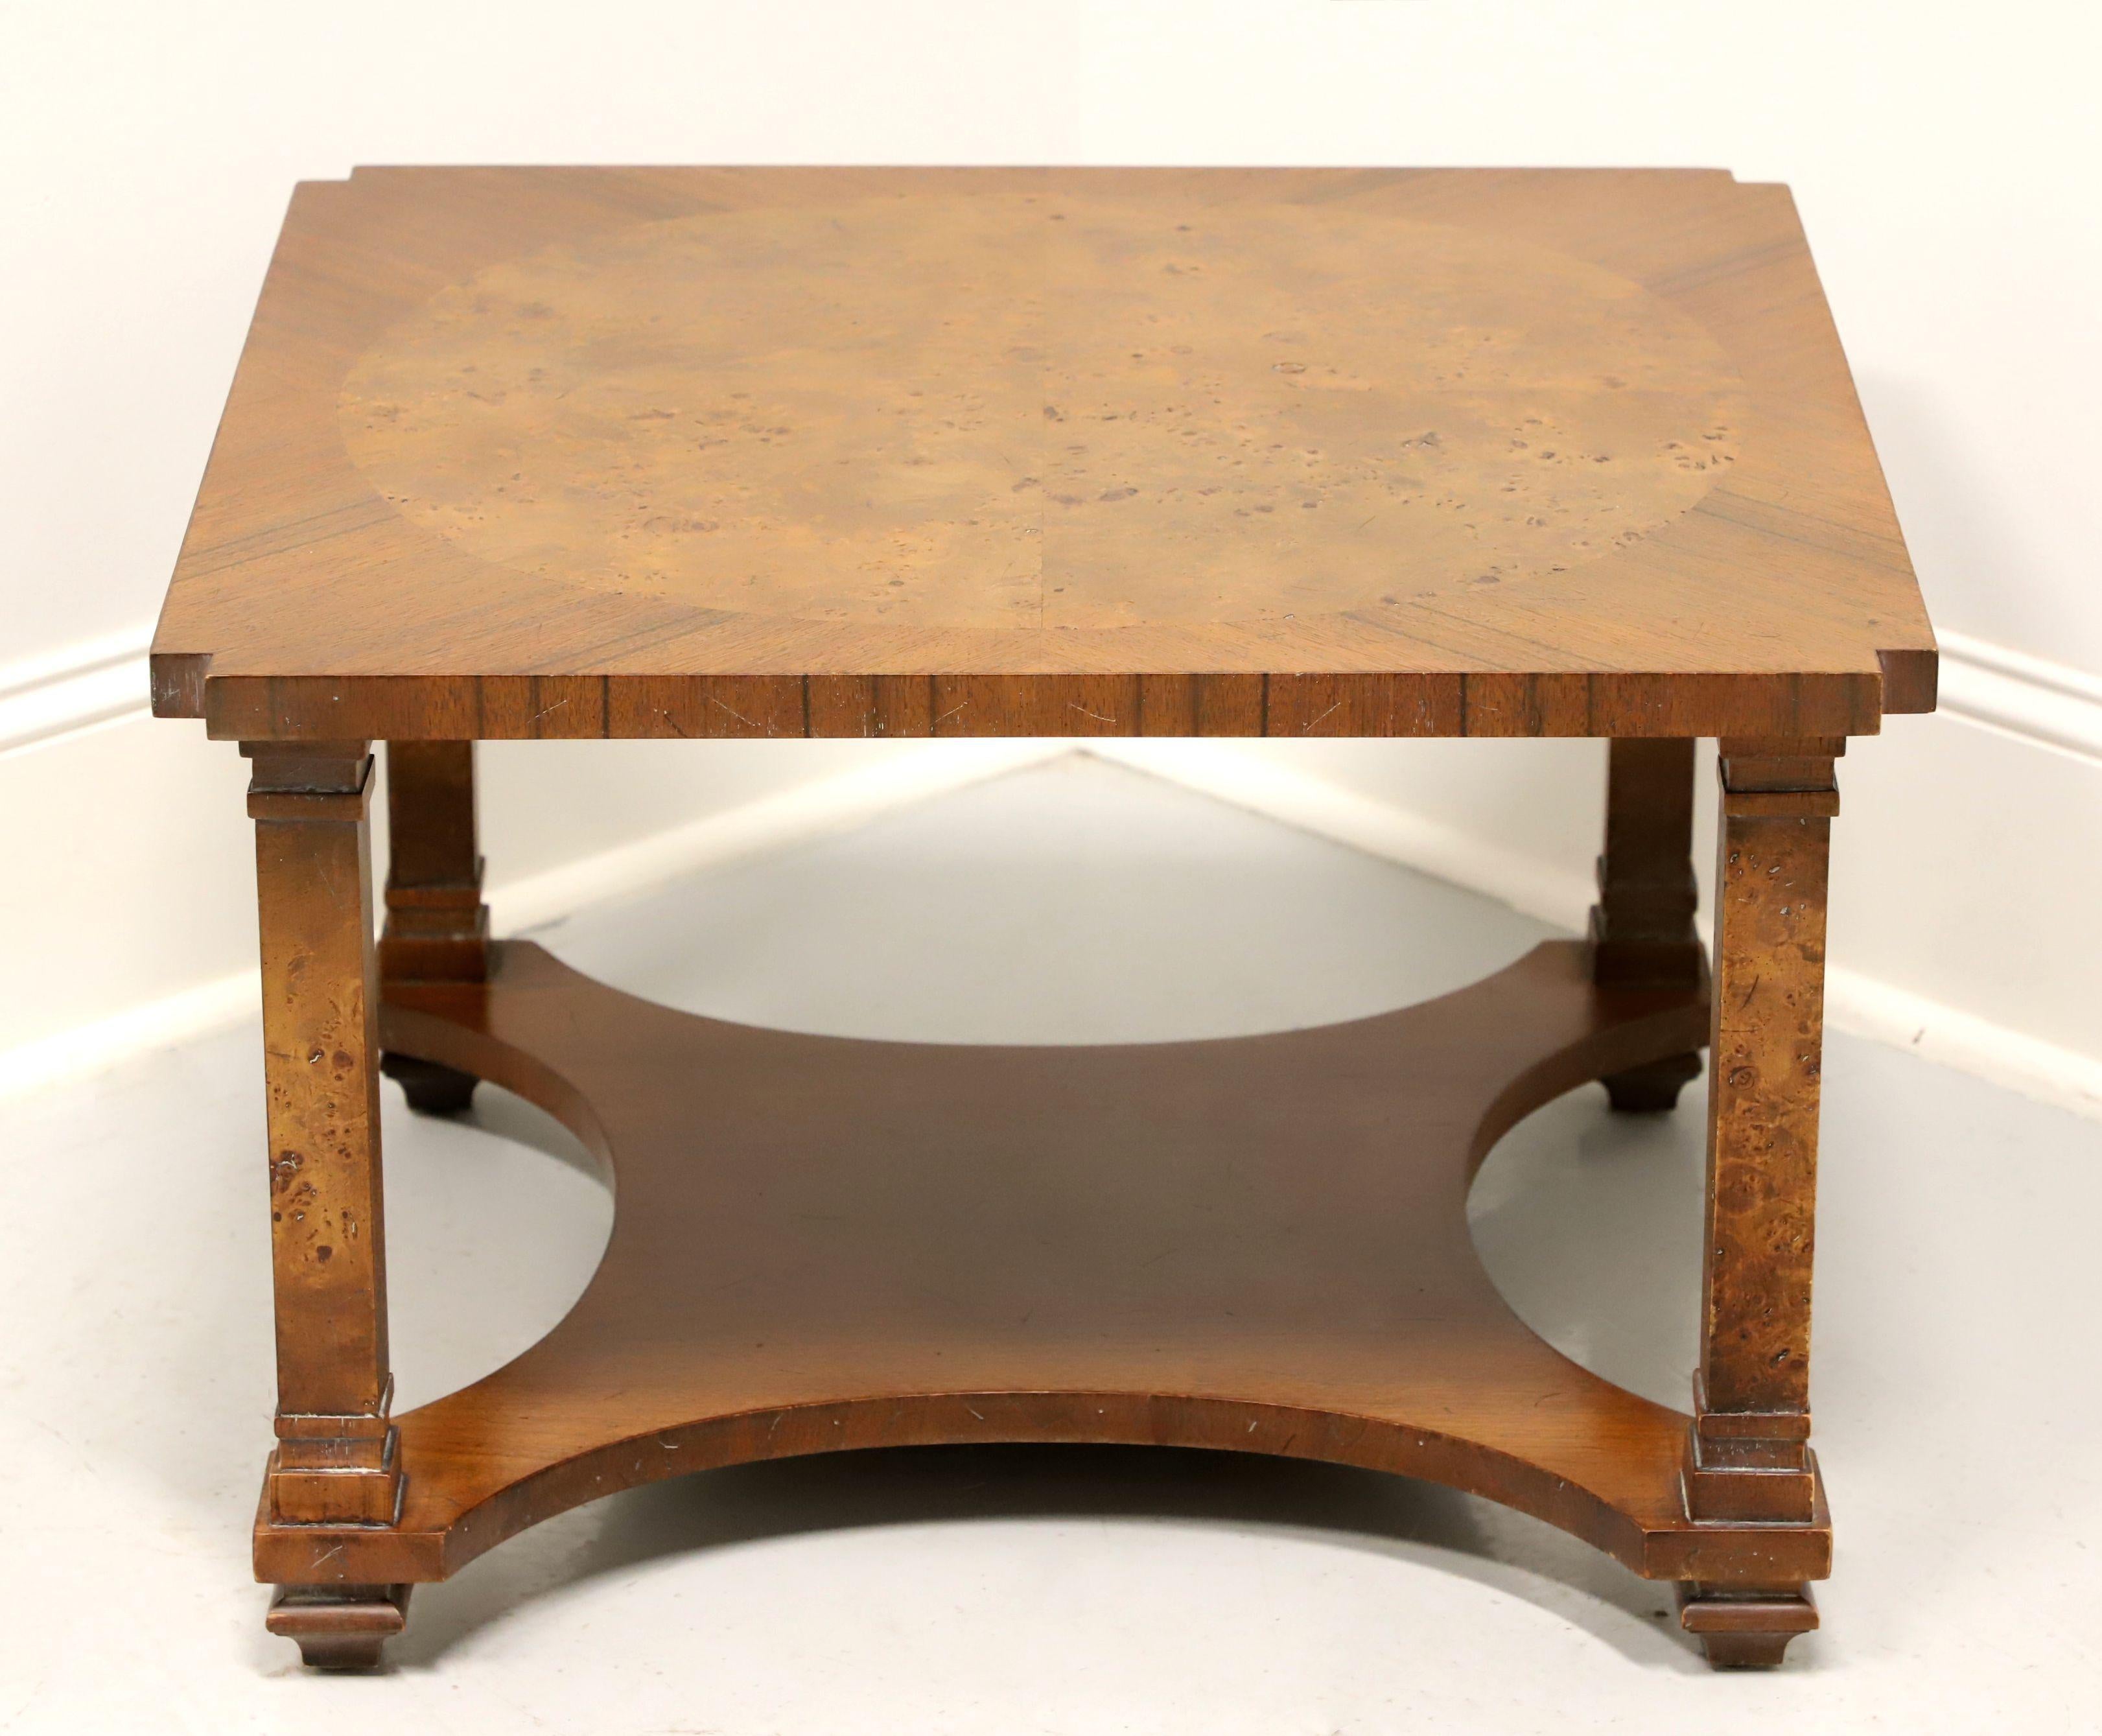 A Neoclassical style square coffee table by Tomlinson Furniture. Walnut with slight distressing, inlaid burlwood top, clipped corners, inlaid burlwood to column like legs and an undertier modified 